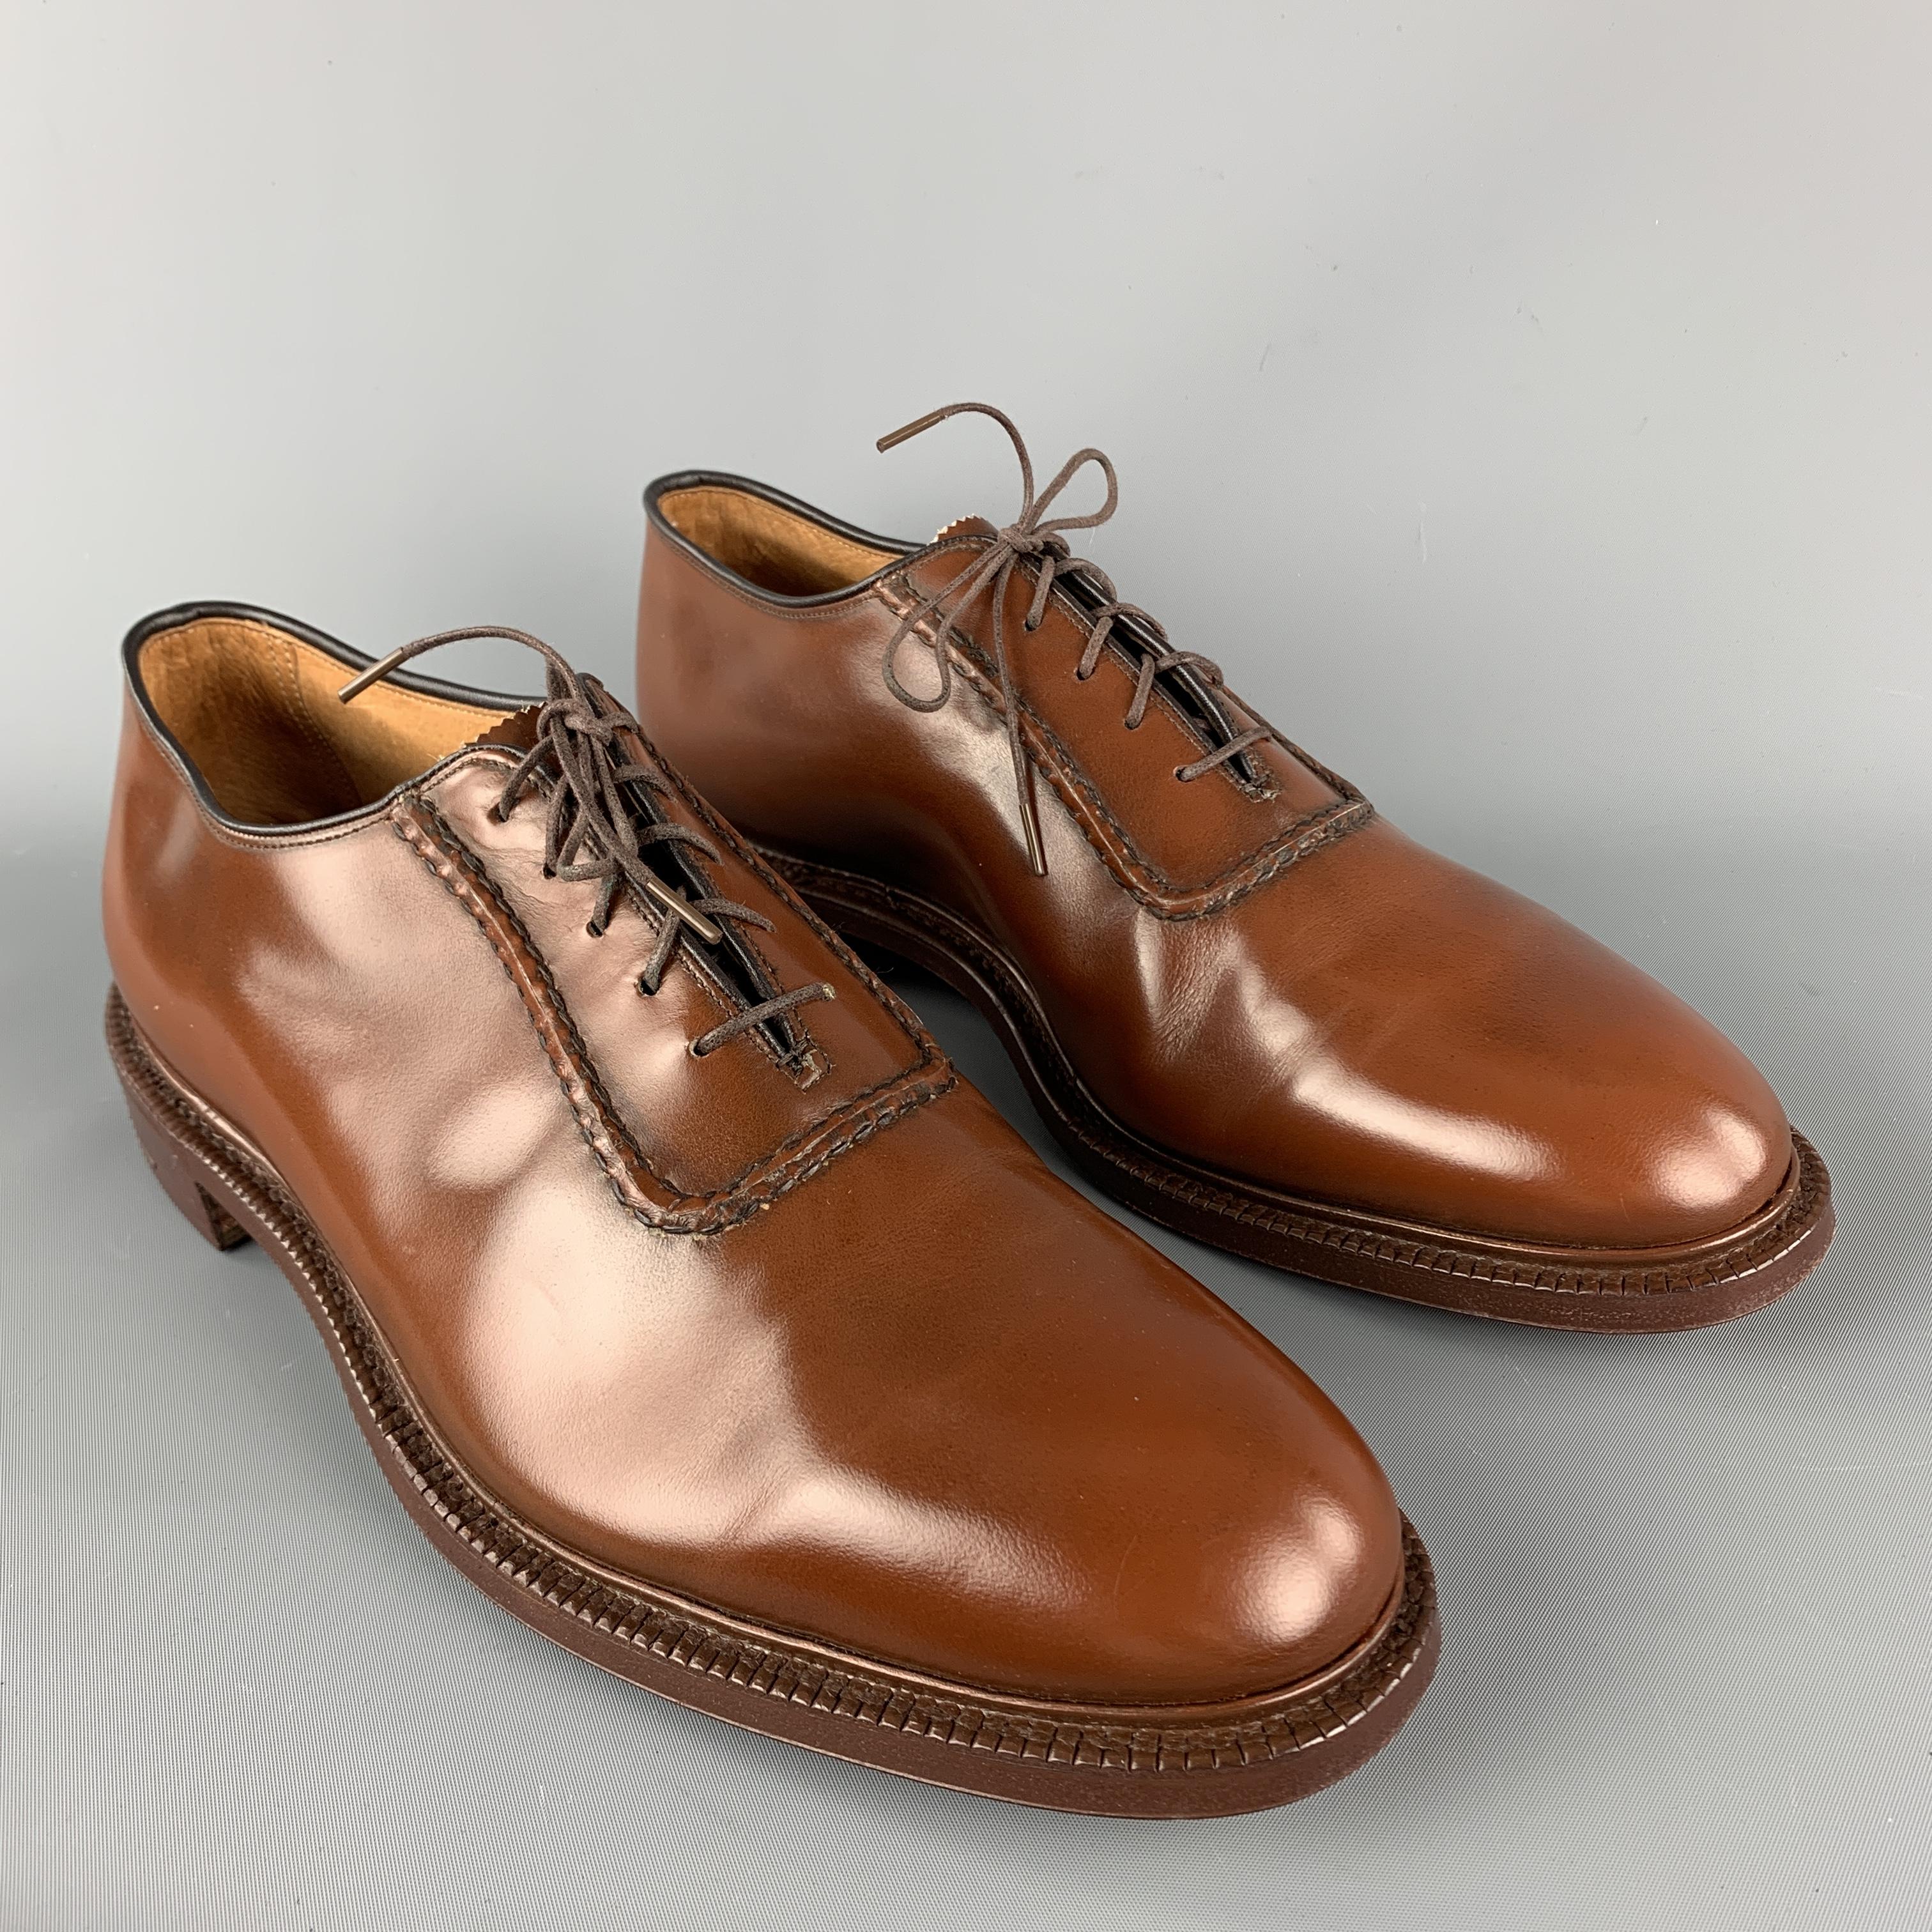 CHURCH'S Lace Up Shoes comes in a tan solid leather material, featuring a contrast stitch at top and a leather sole. Made in England. 

New with Box. 
Marked: UK 10 B  
0269TCB   Y014/617

Outsole: 12.25 x 4.5 in. 